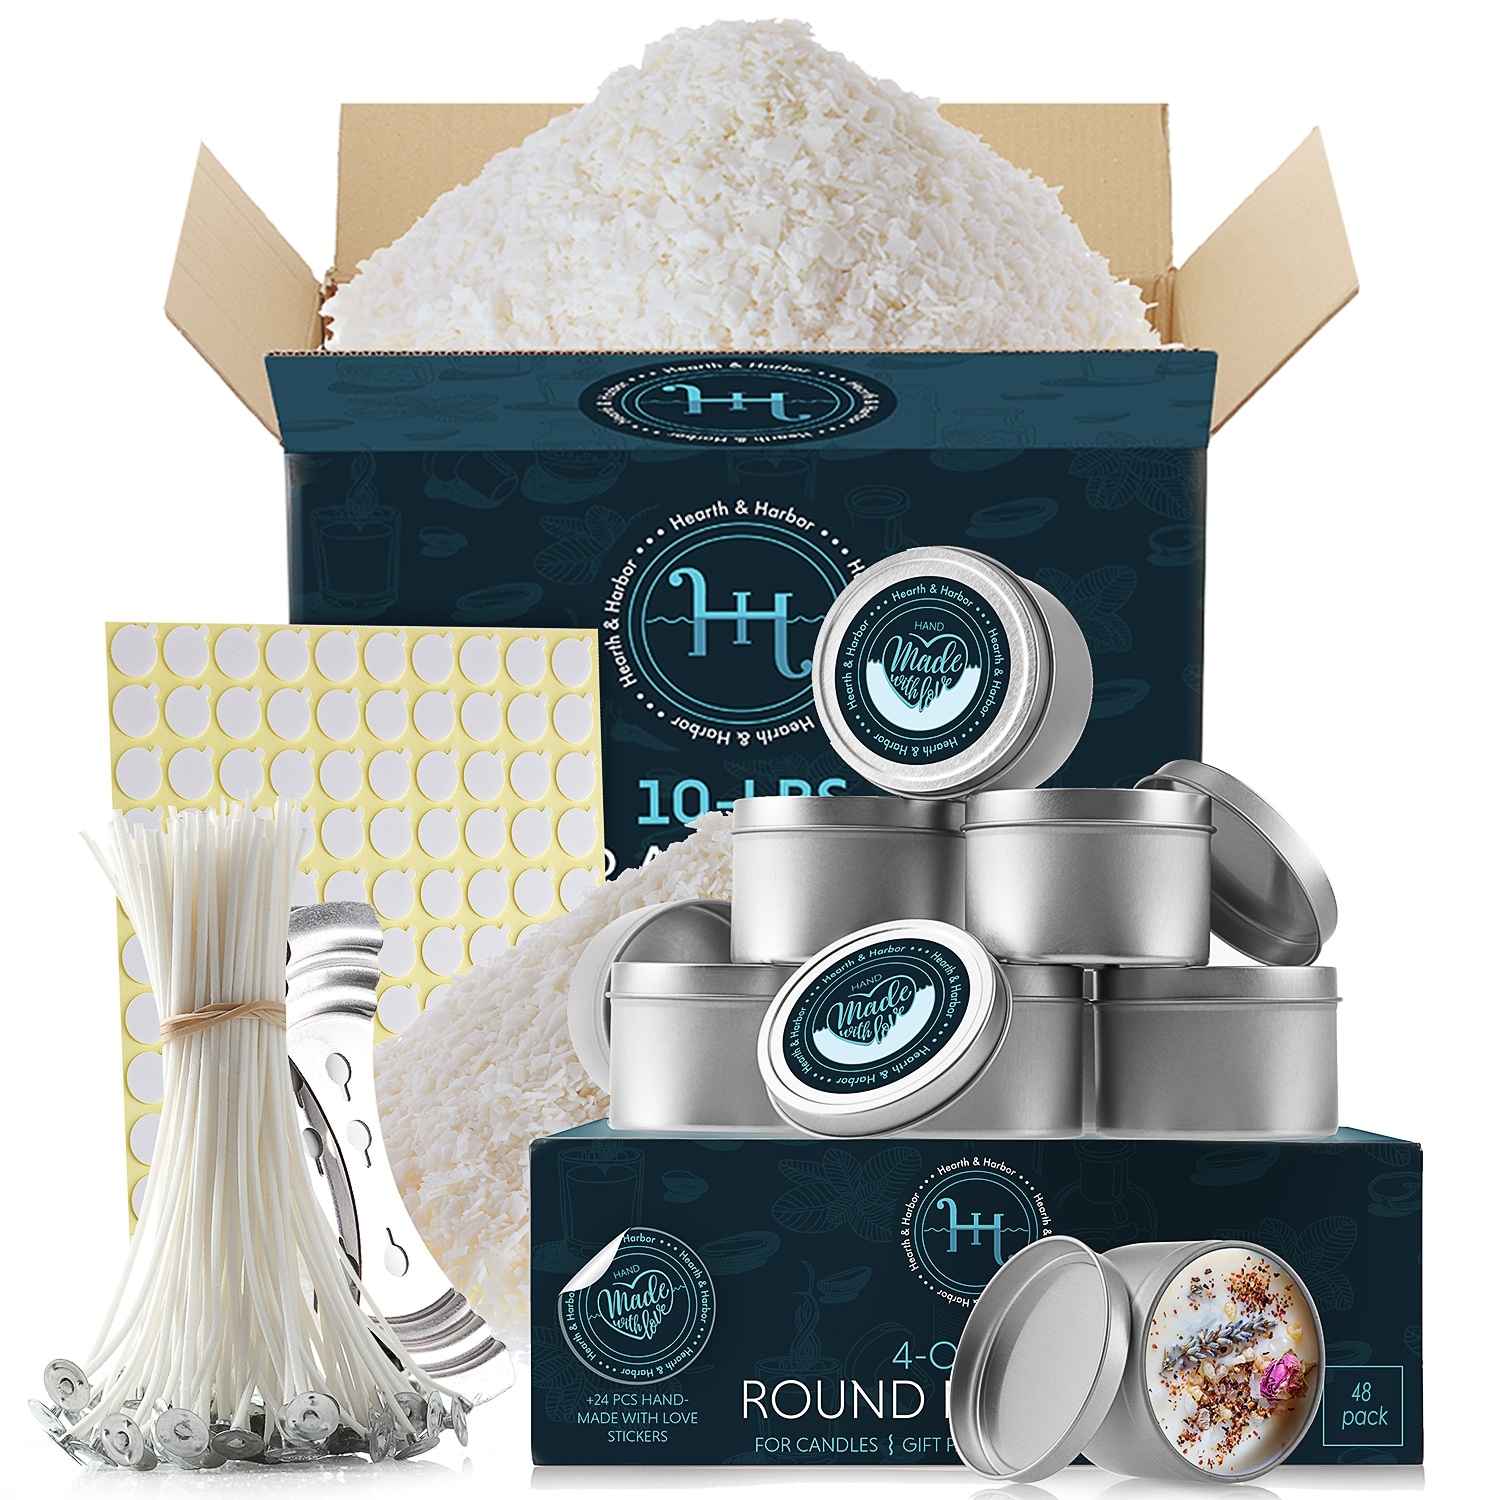 Candle Making Kit With Electronic Hot Plate Soy Christmas 